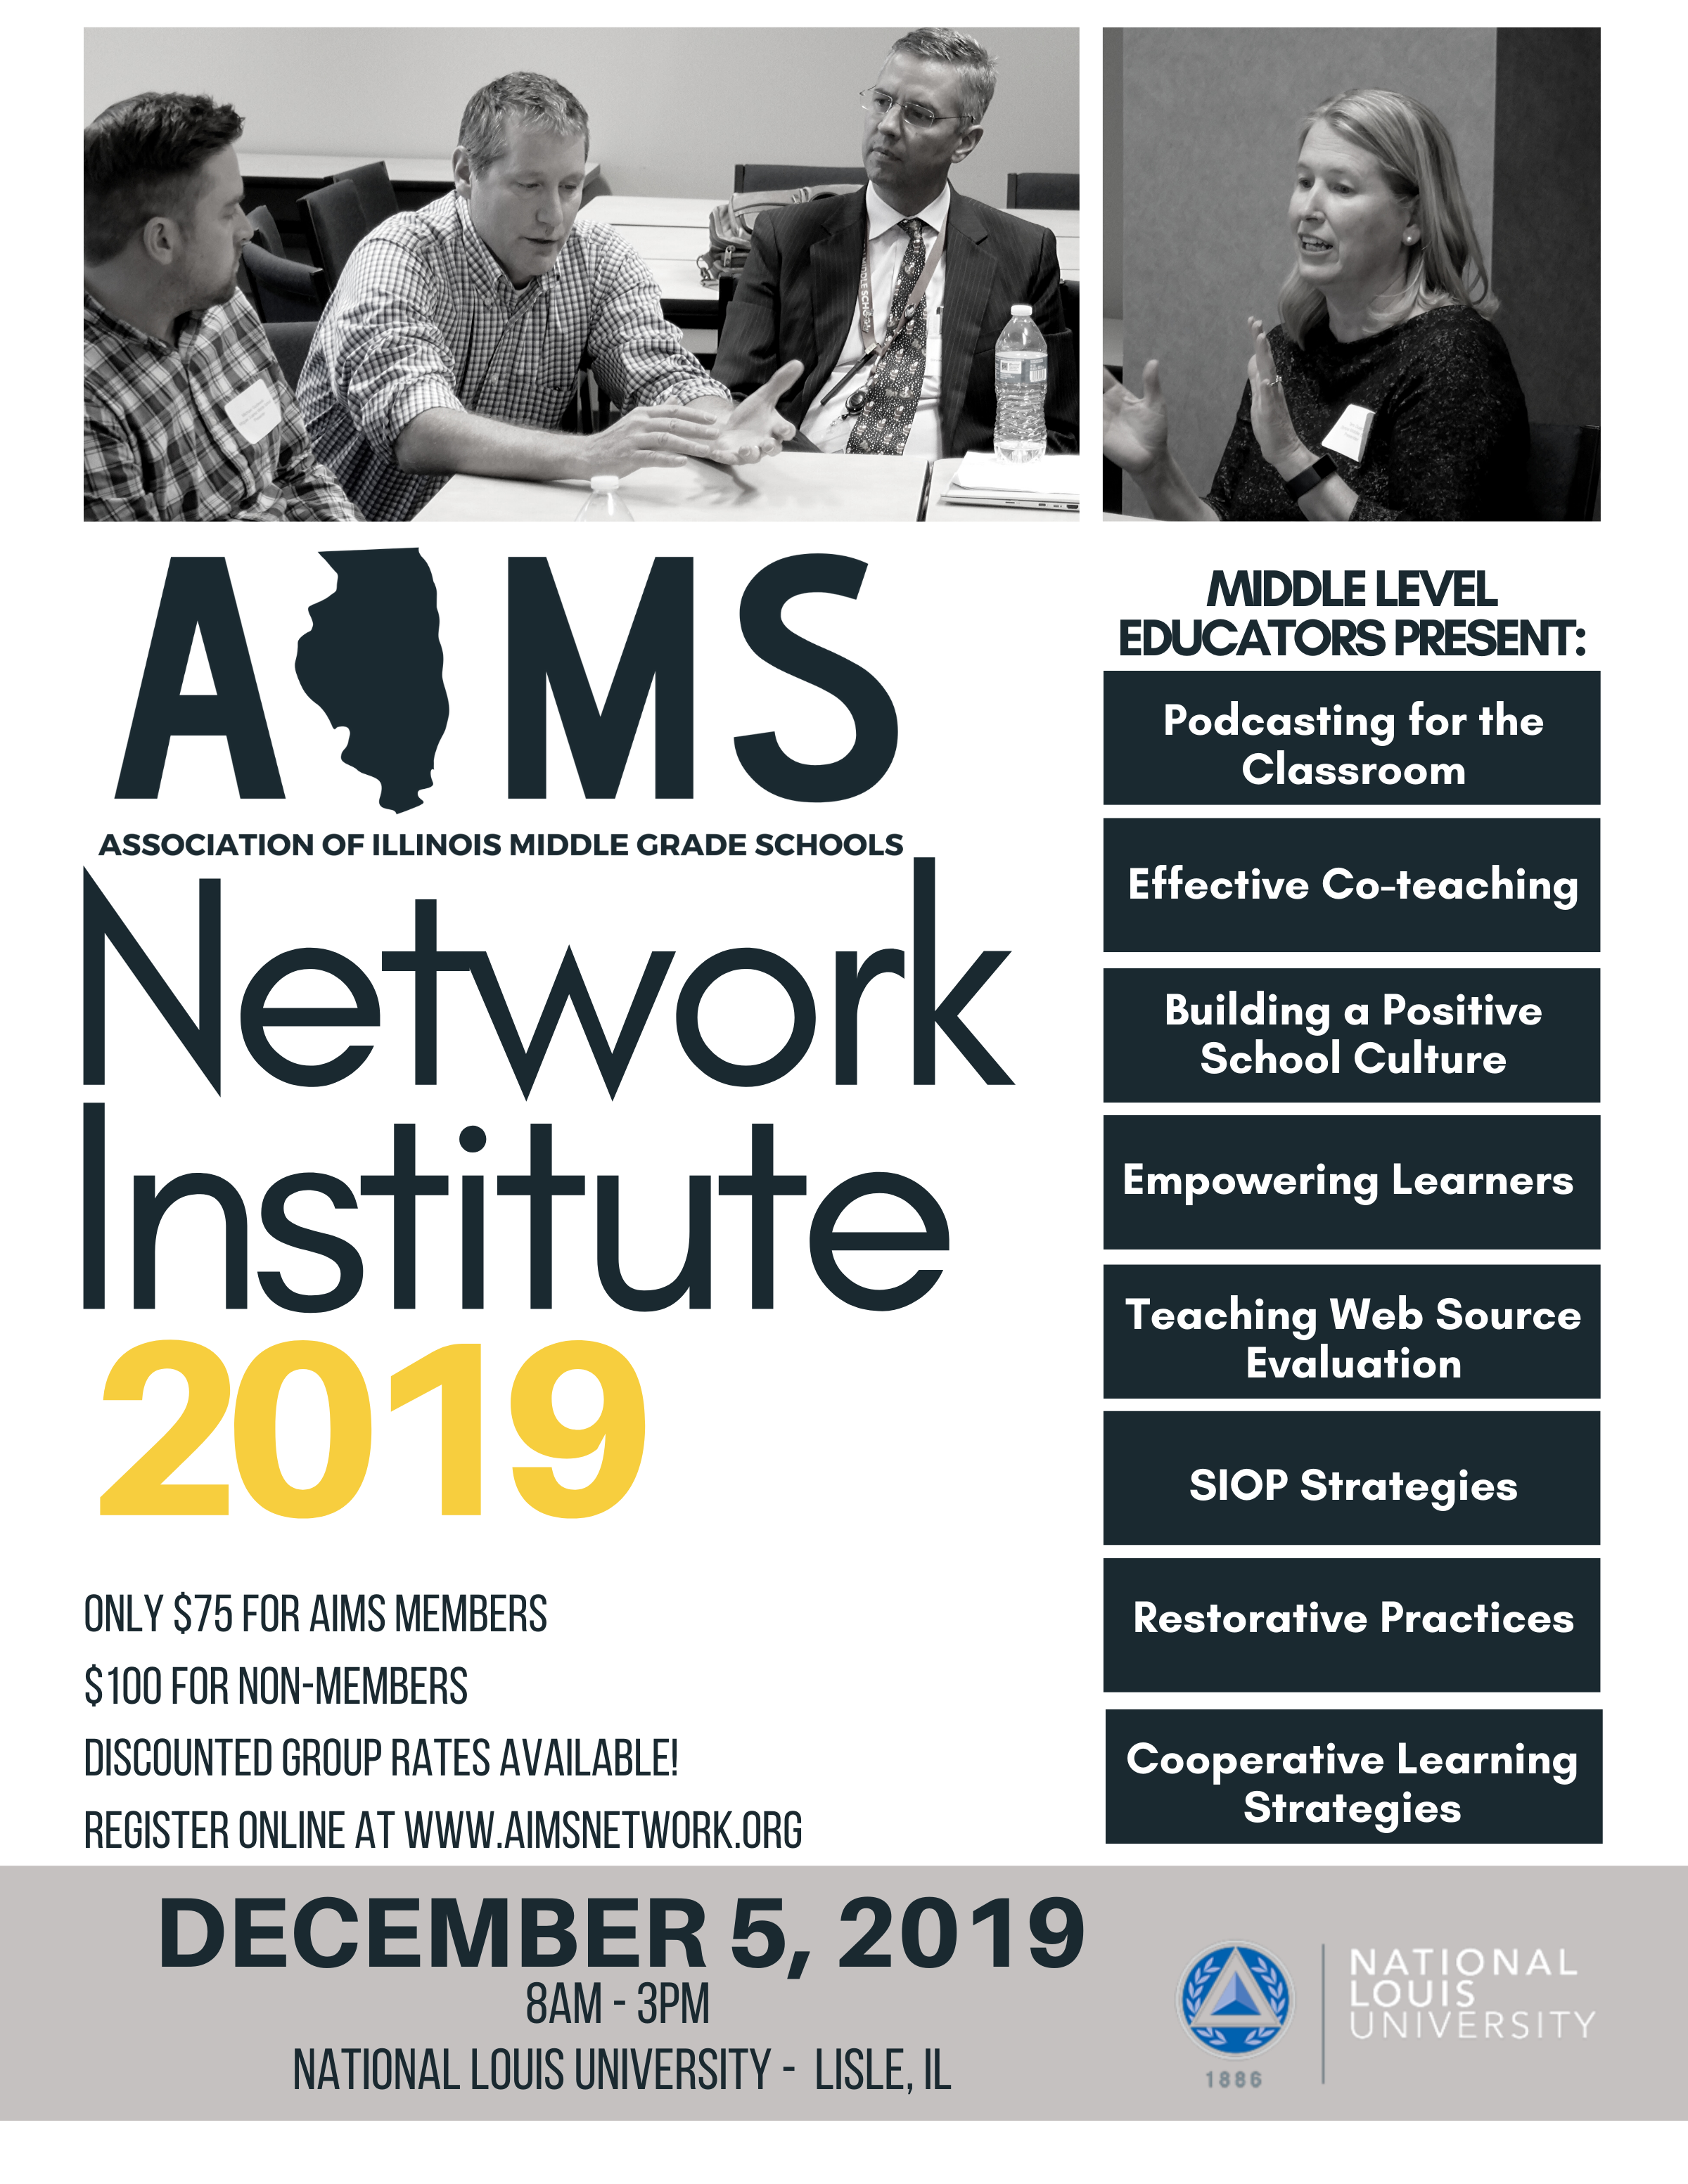 2019 Network Institute flyer with sessions